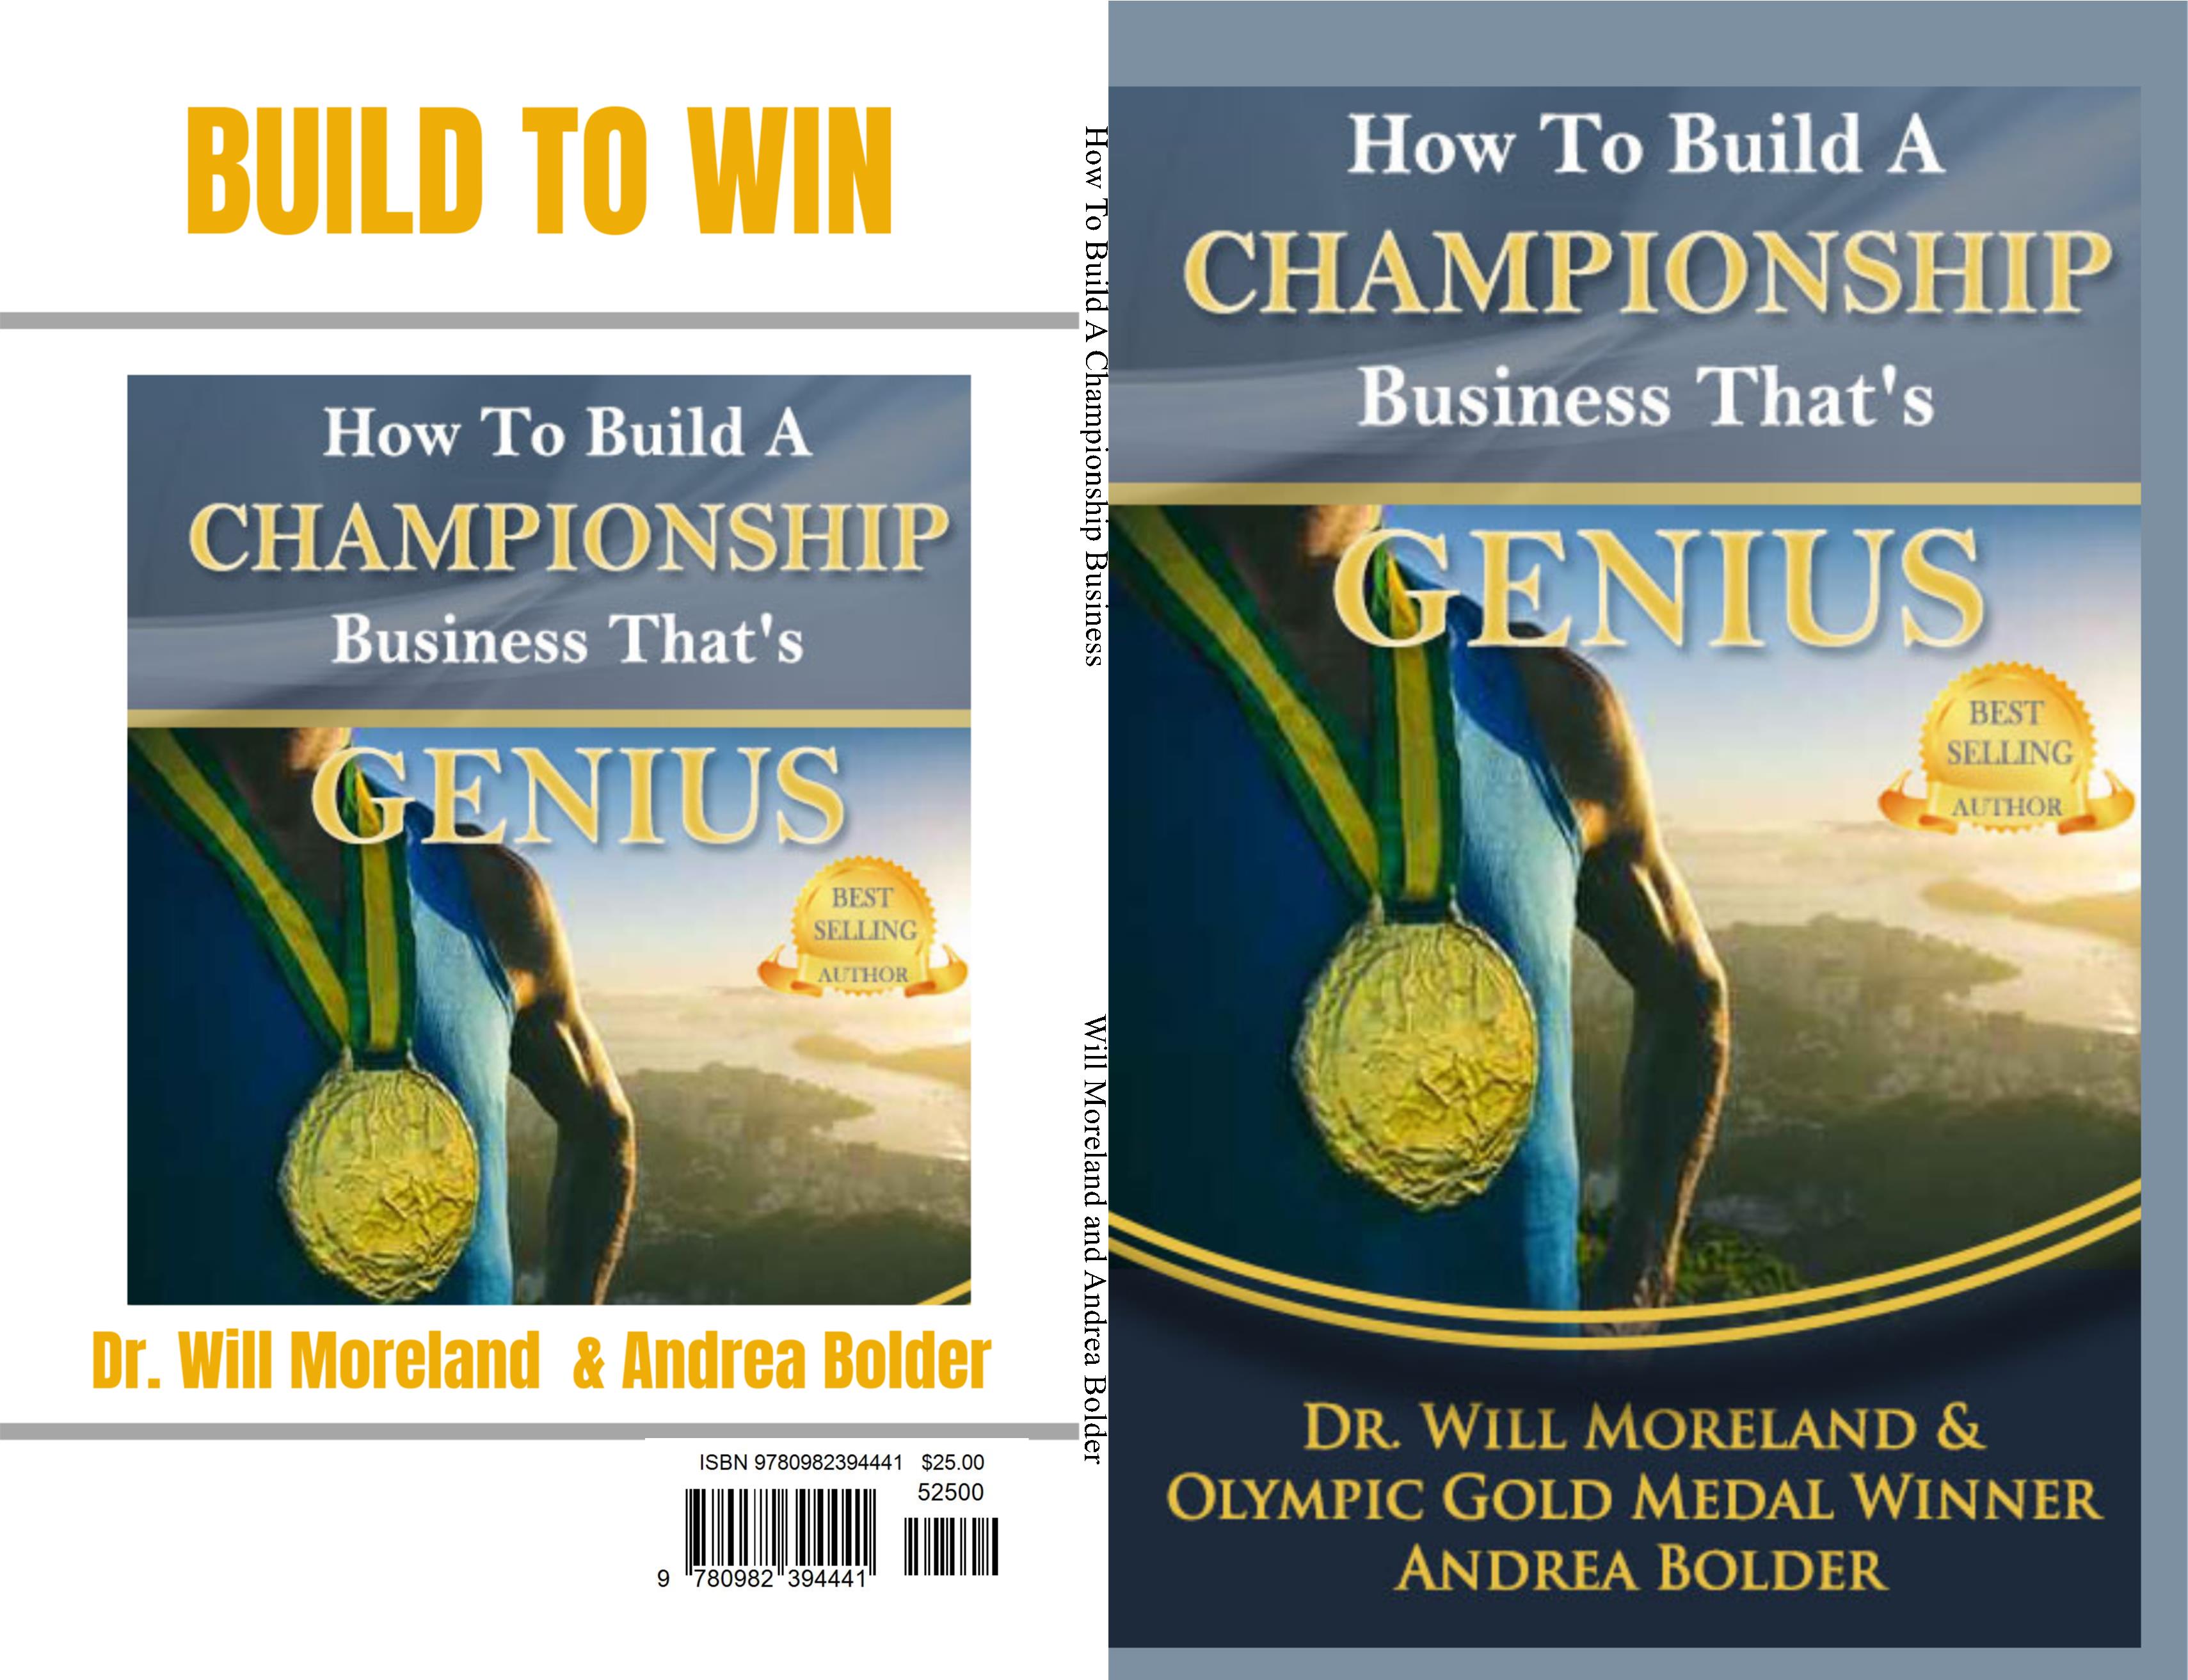 How To Build A Championship Business cover image